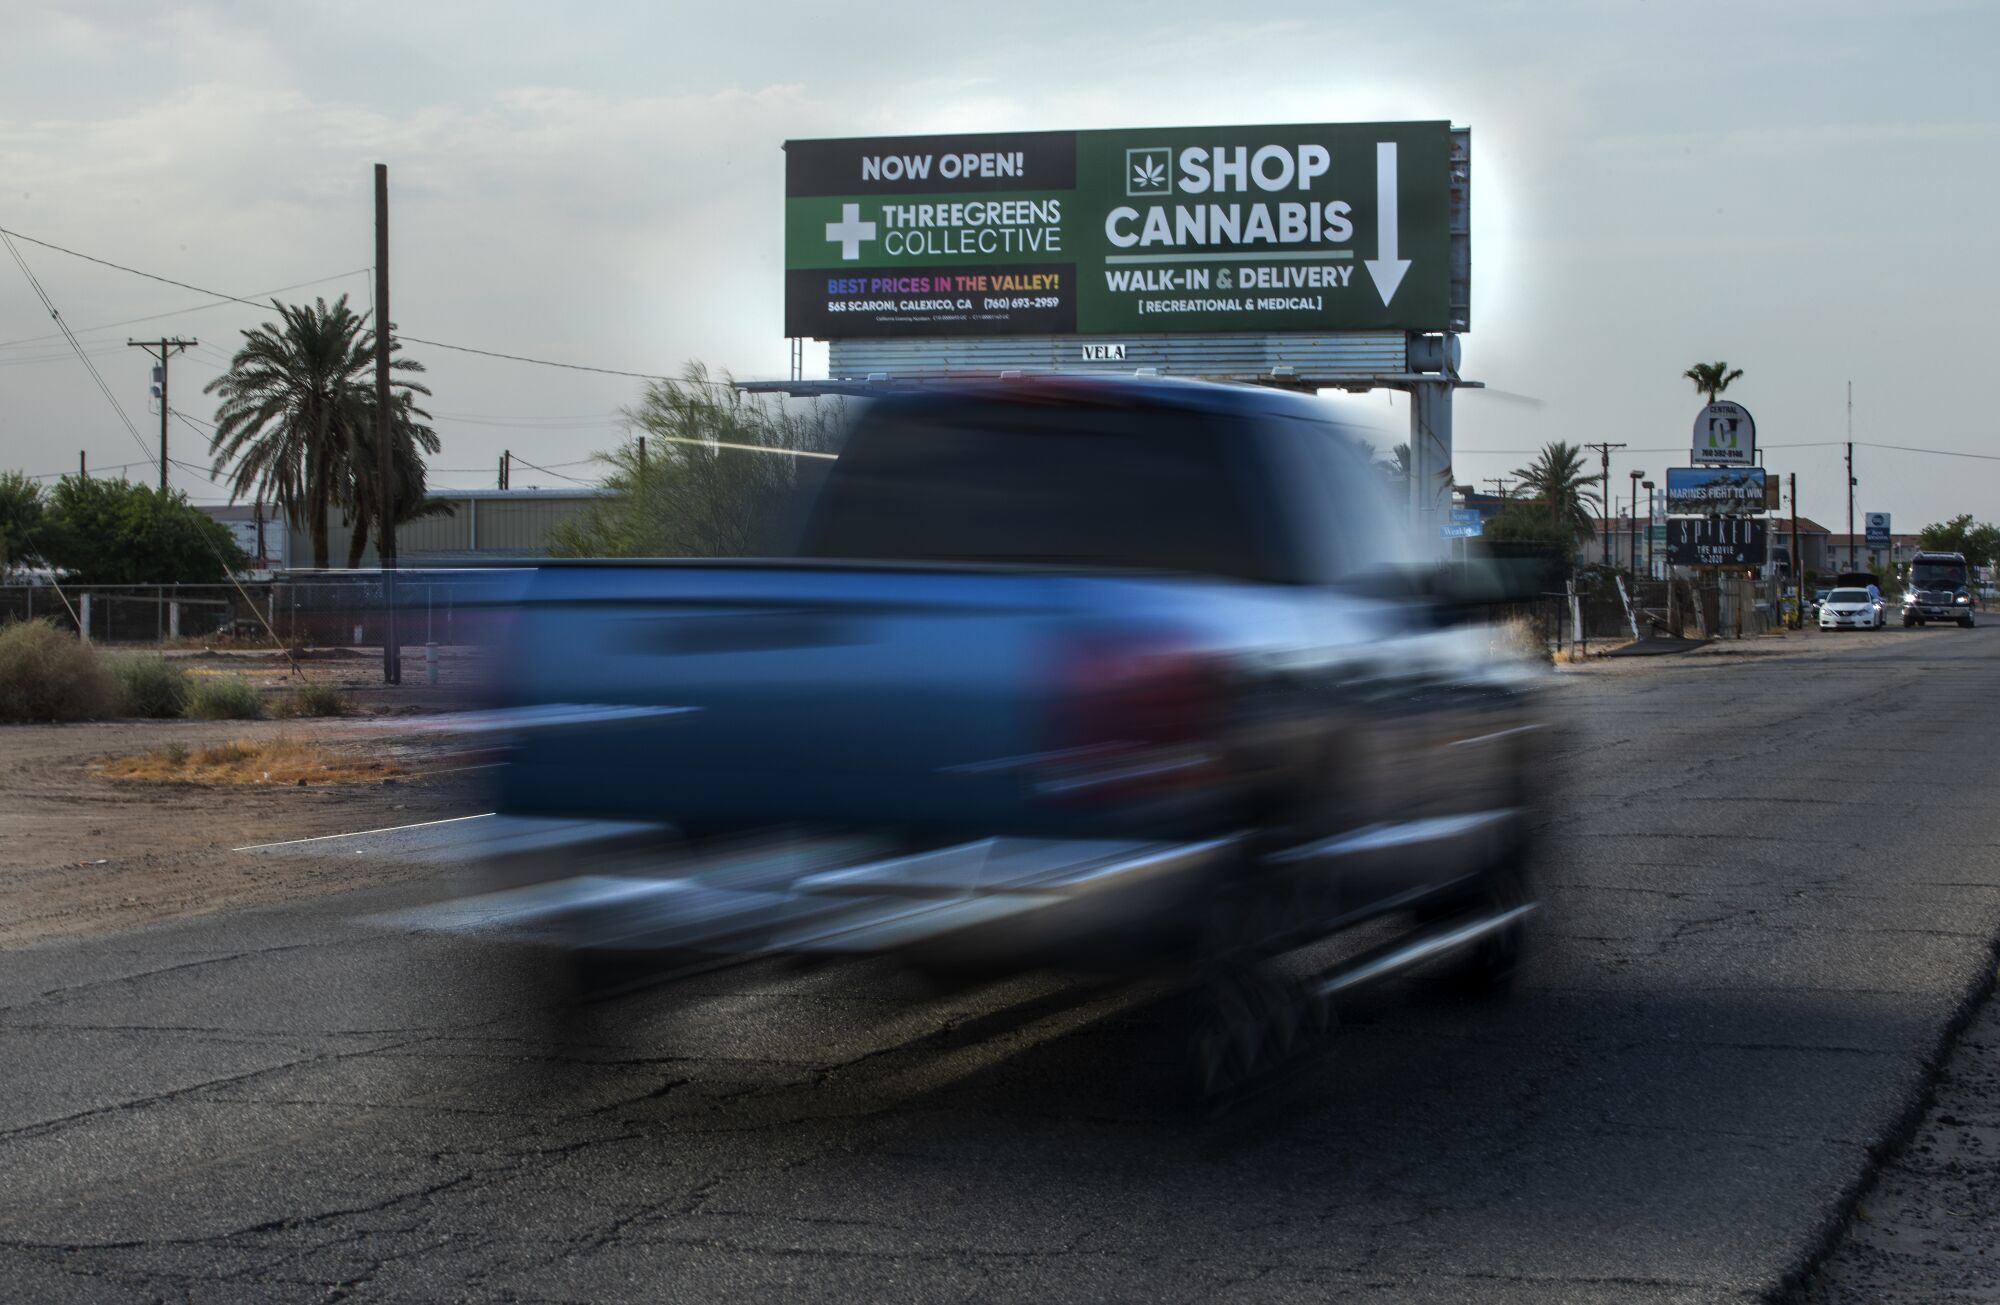 A truck drives by a billboard advertising a cannabis business.